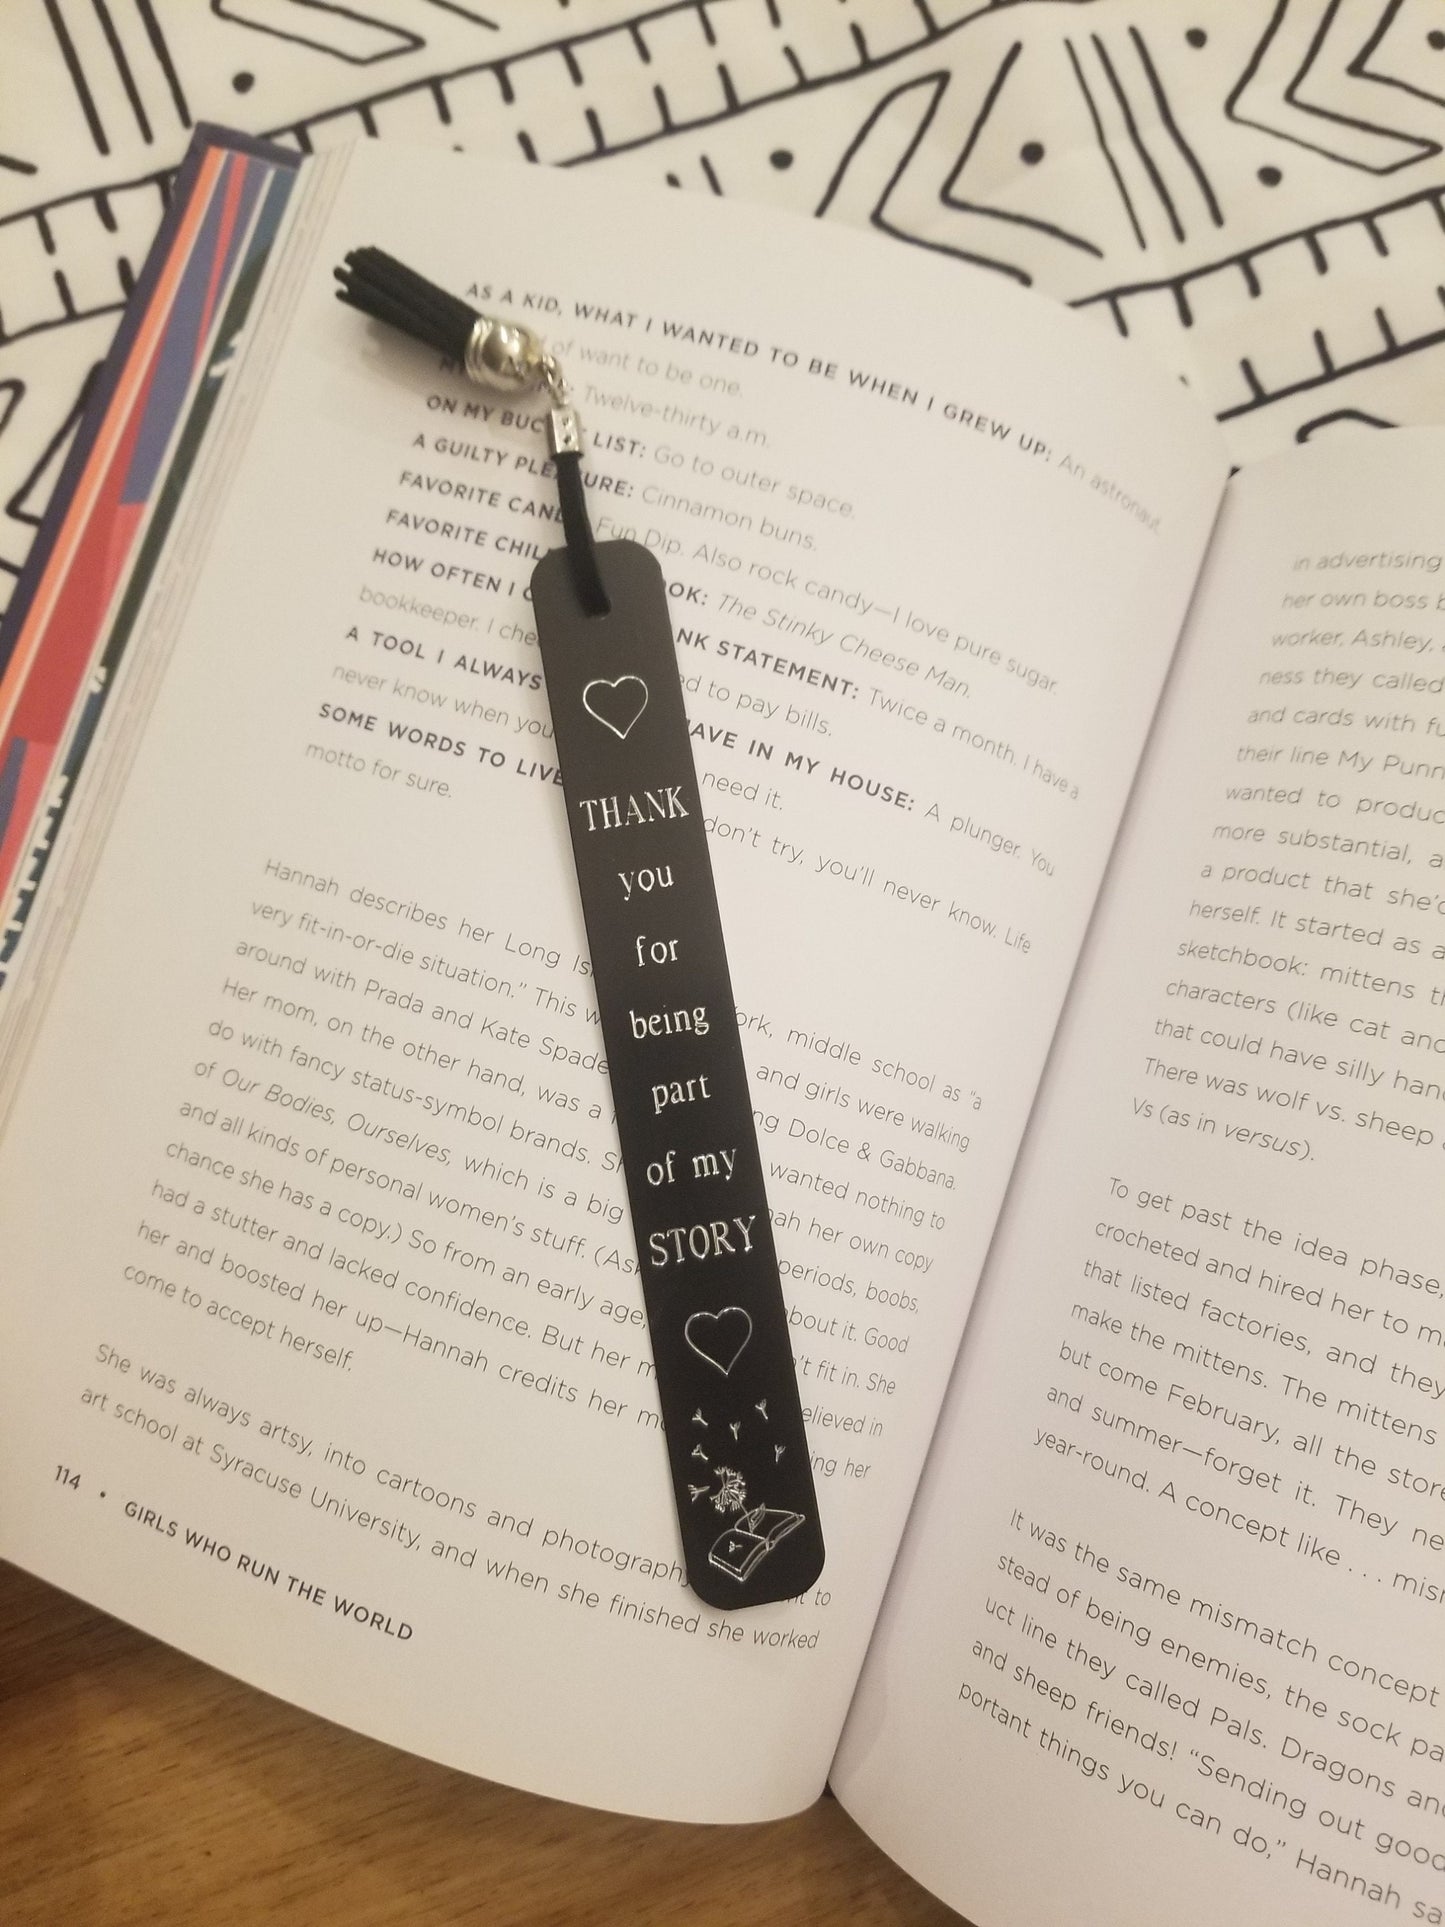 Thanks for being a part of my story - Custom teacher appreciation bookmark